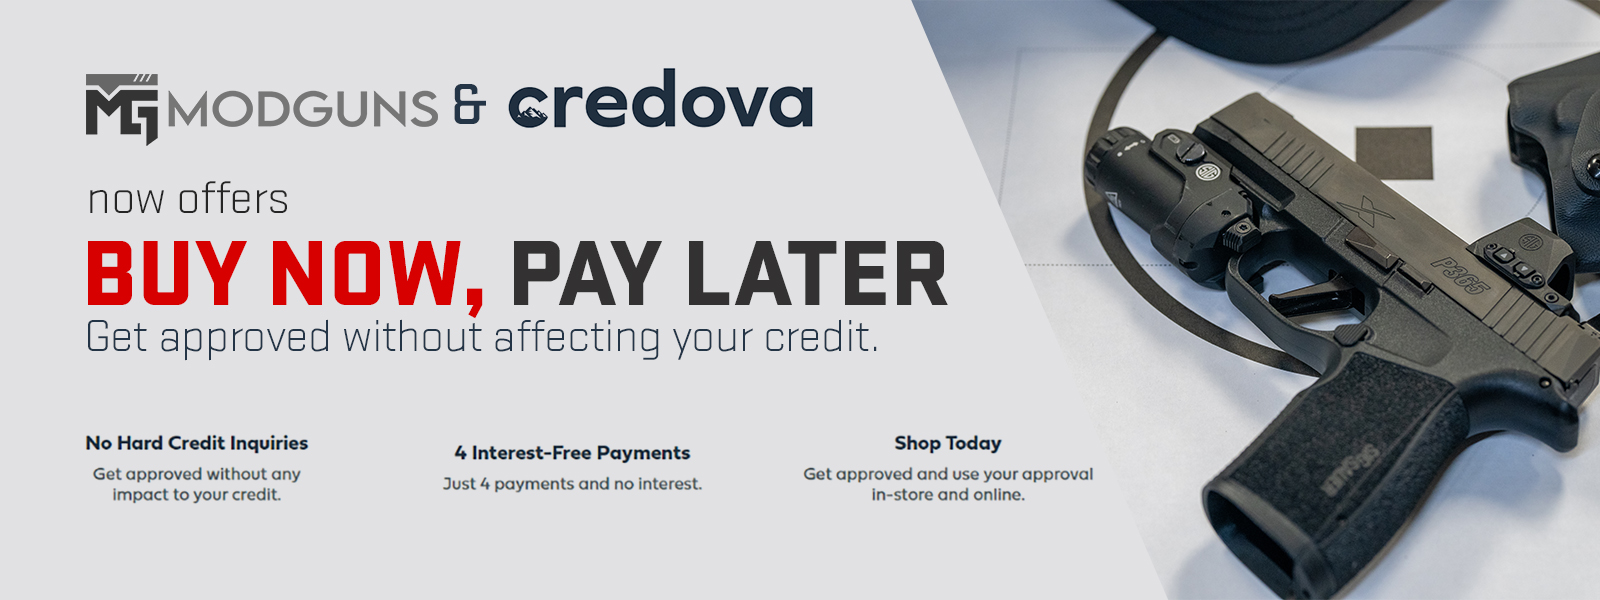 ModGuns and Credova Buy Now Pay Later